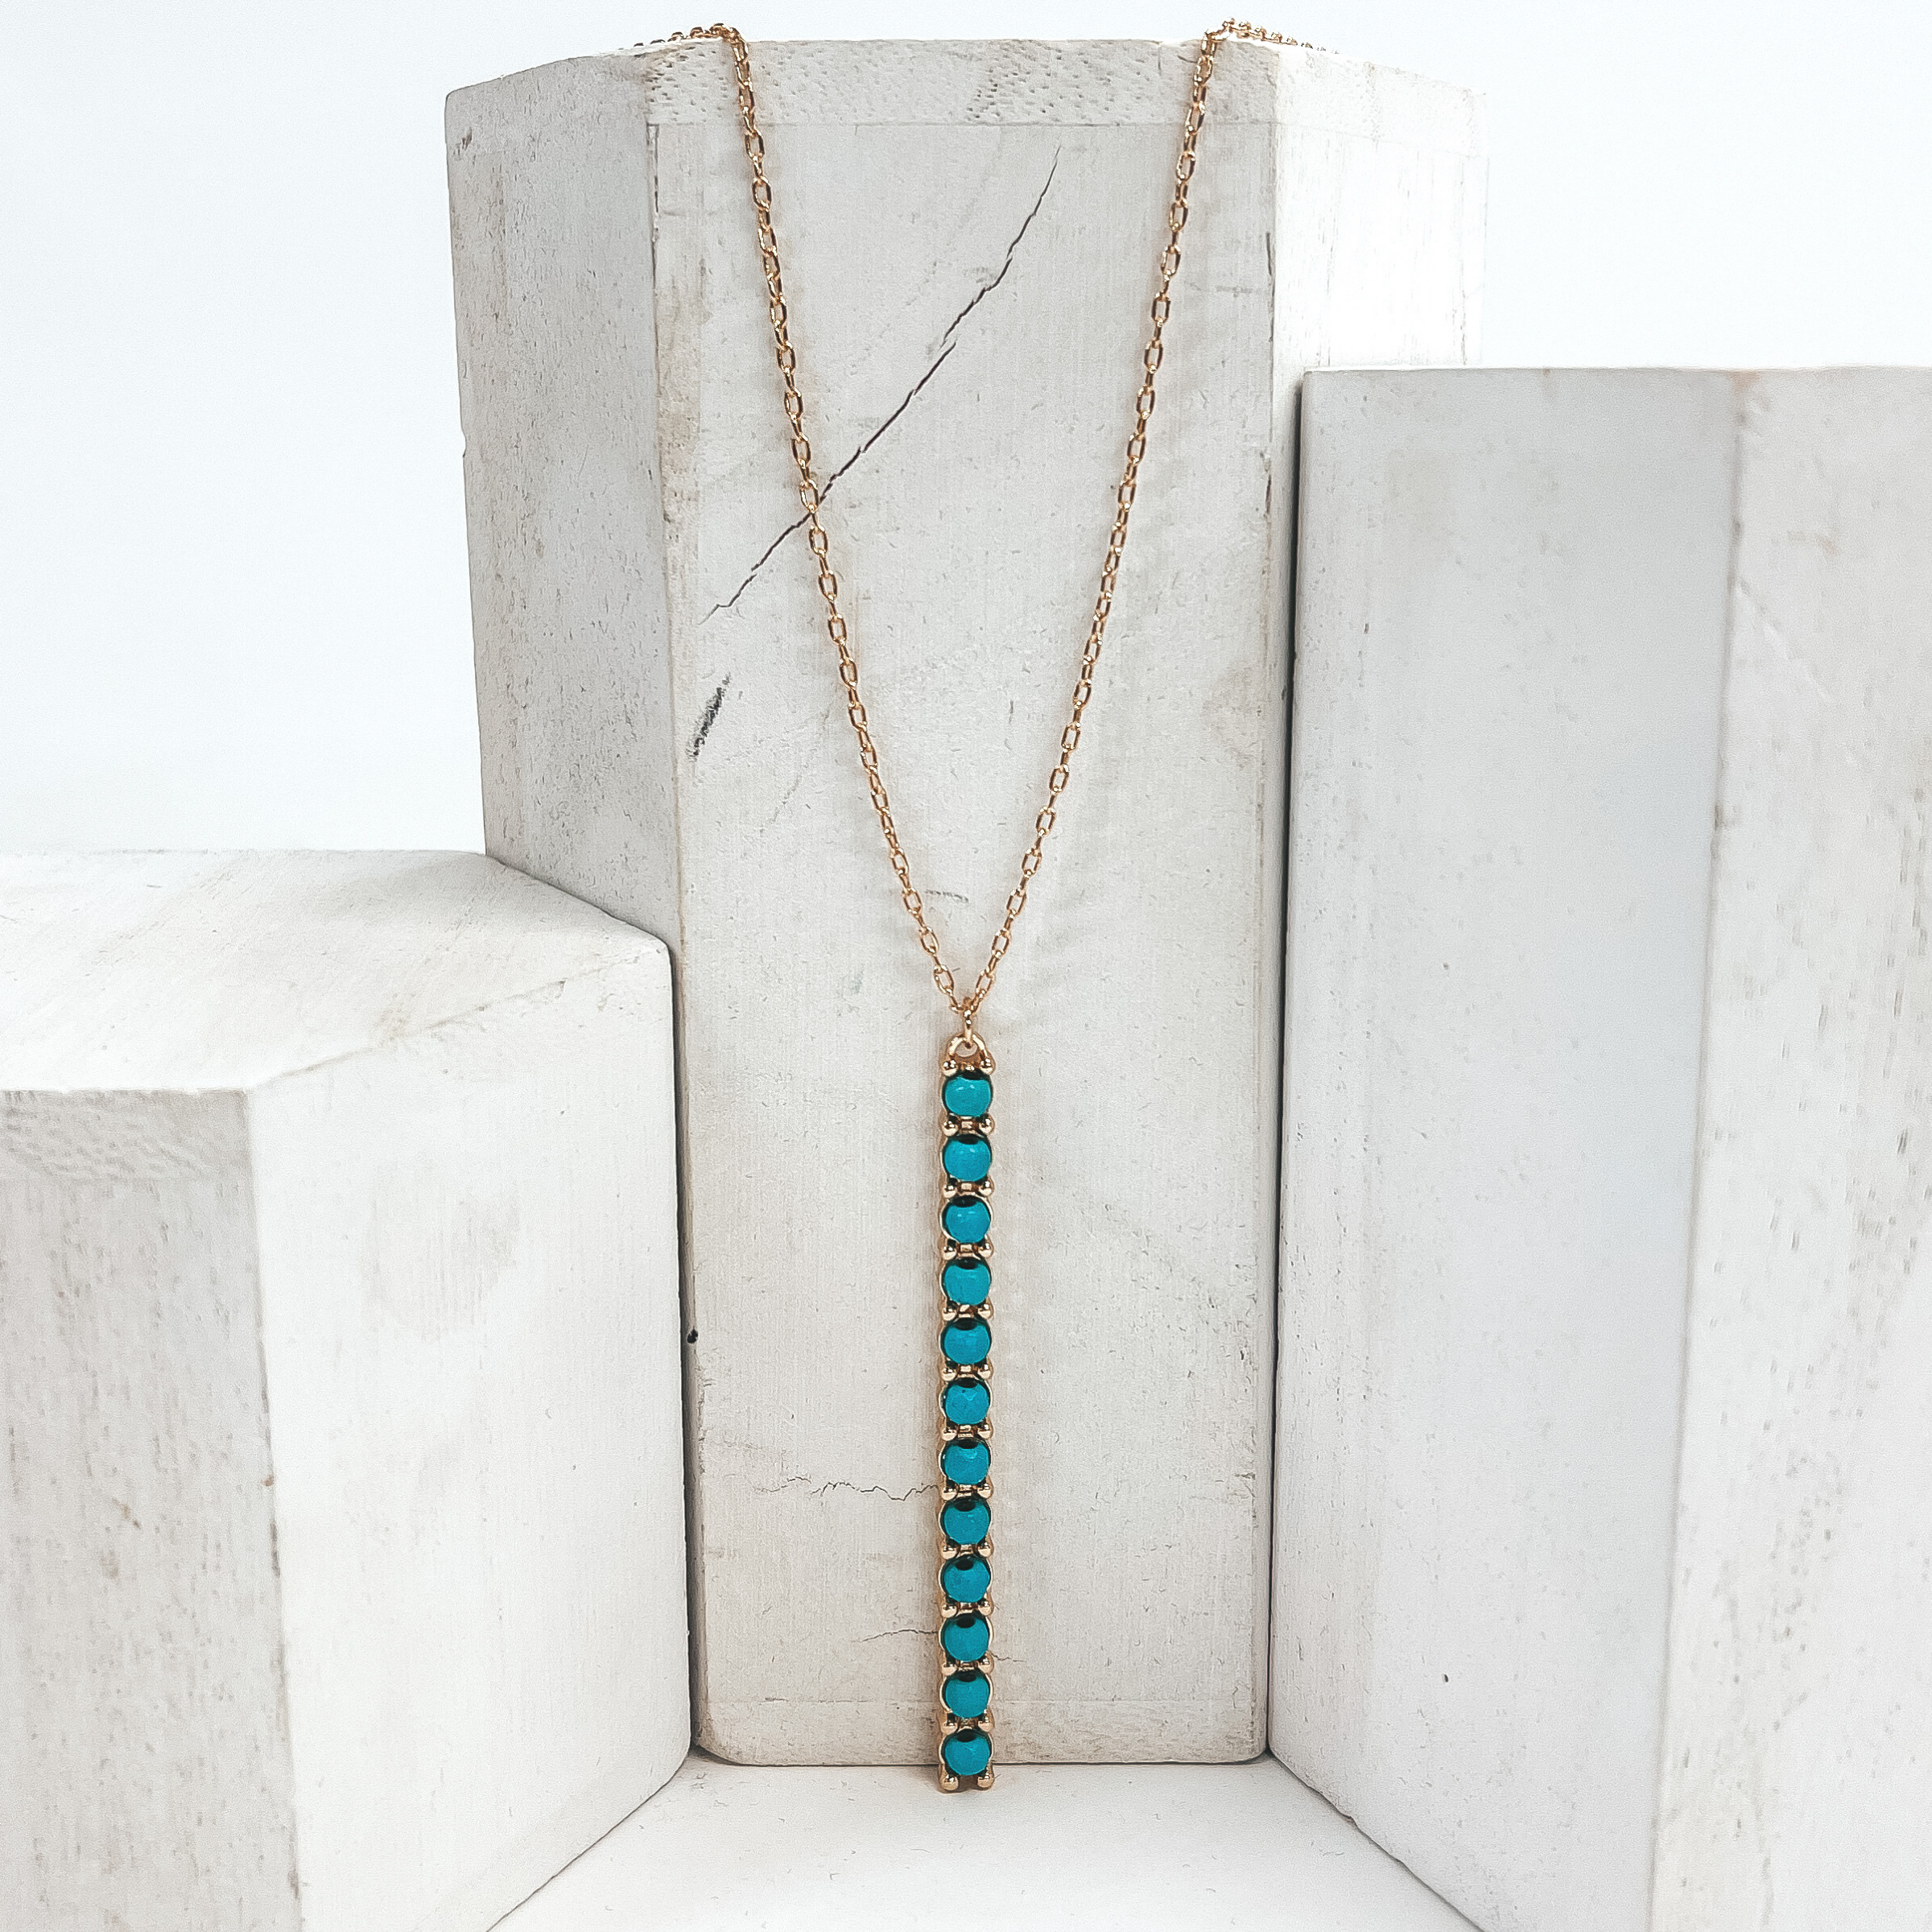 This is a 30 inch adjustable gold necklace with  a gold 2.75 inch bar pendant with turquoise   beads. This necklace is pictured laying on a white  block on a white background with one white block on  each side.